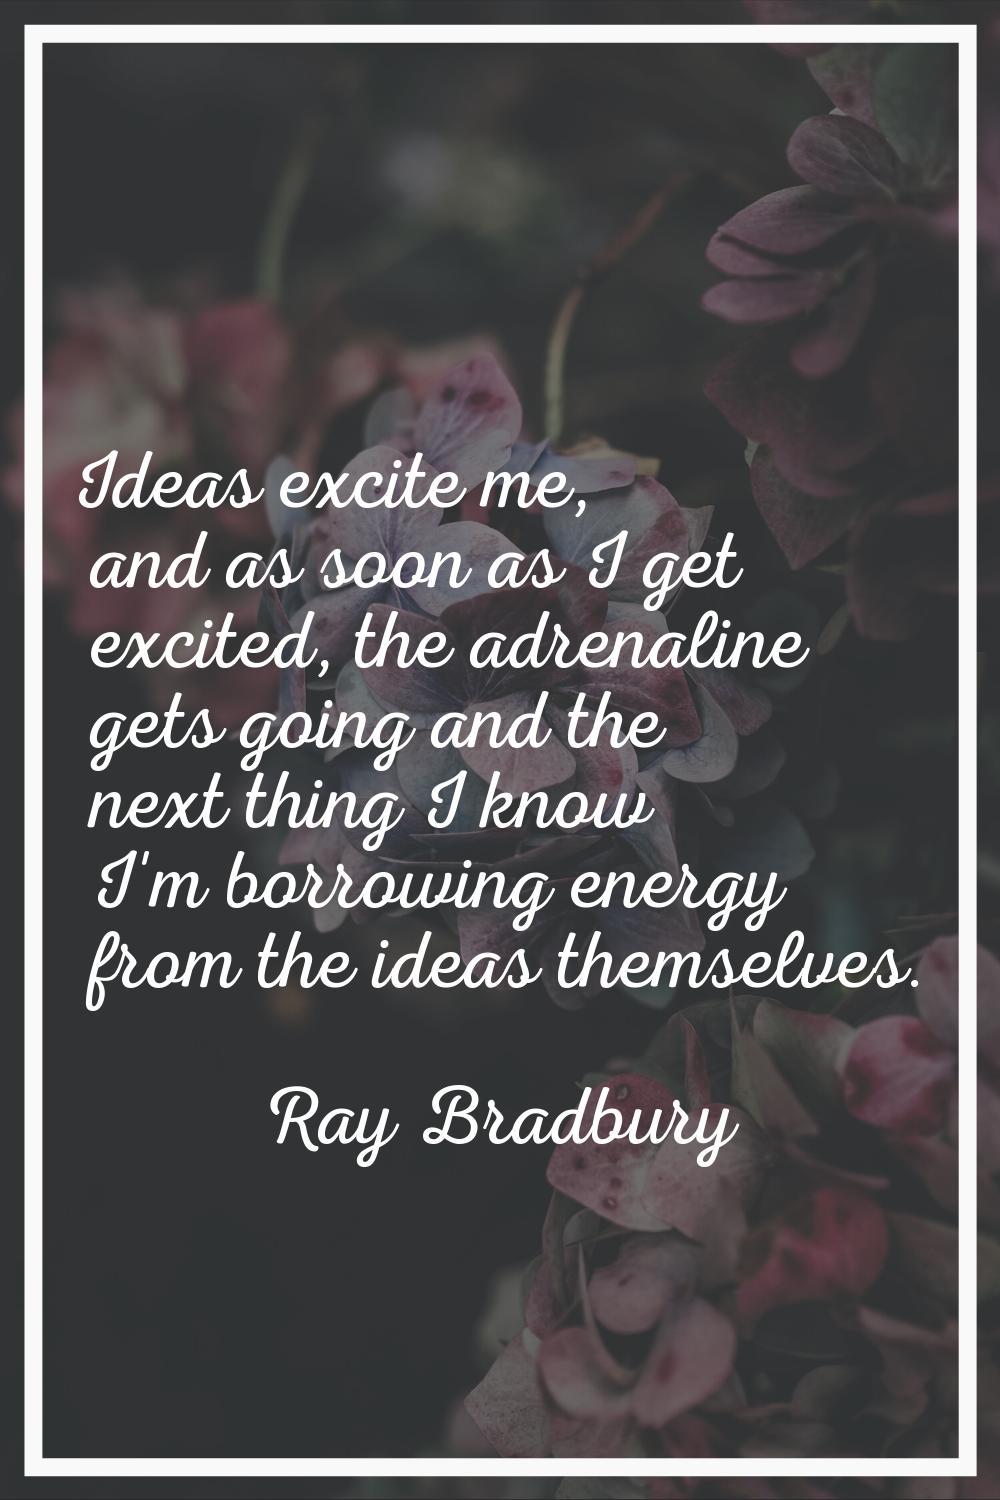 Ideas excite me, and as soon as I get excited, the adrenaline gets going and the next thing I know 